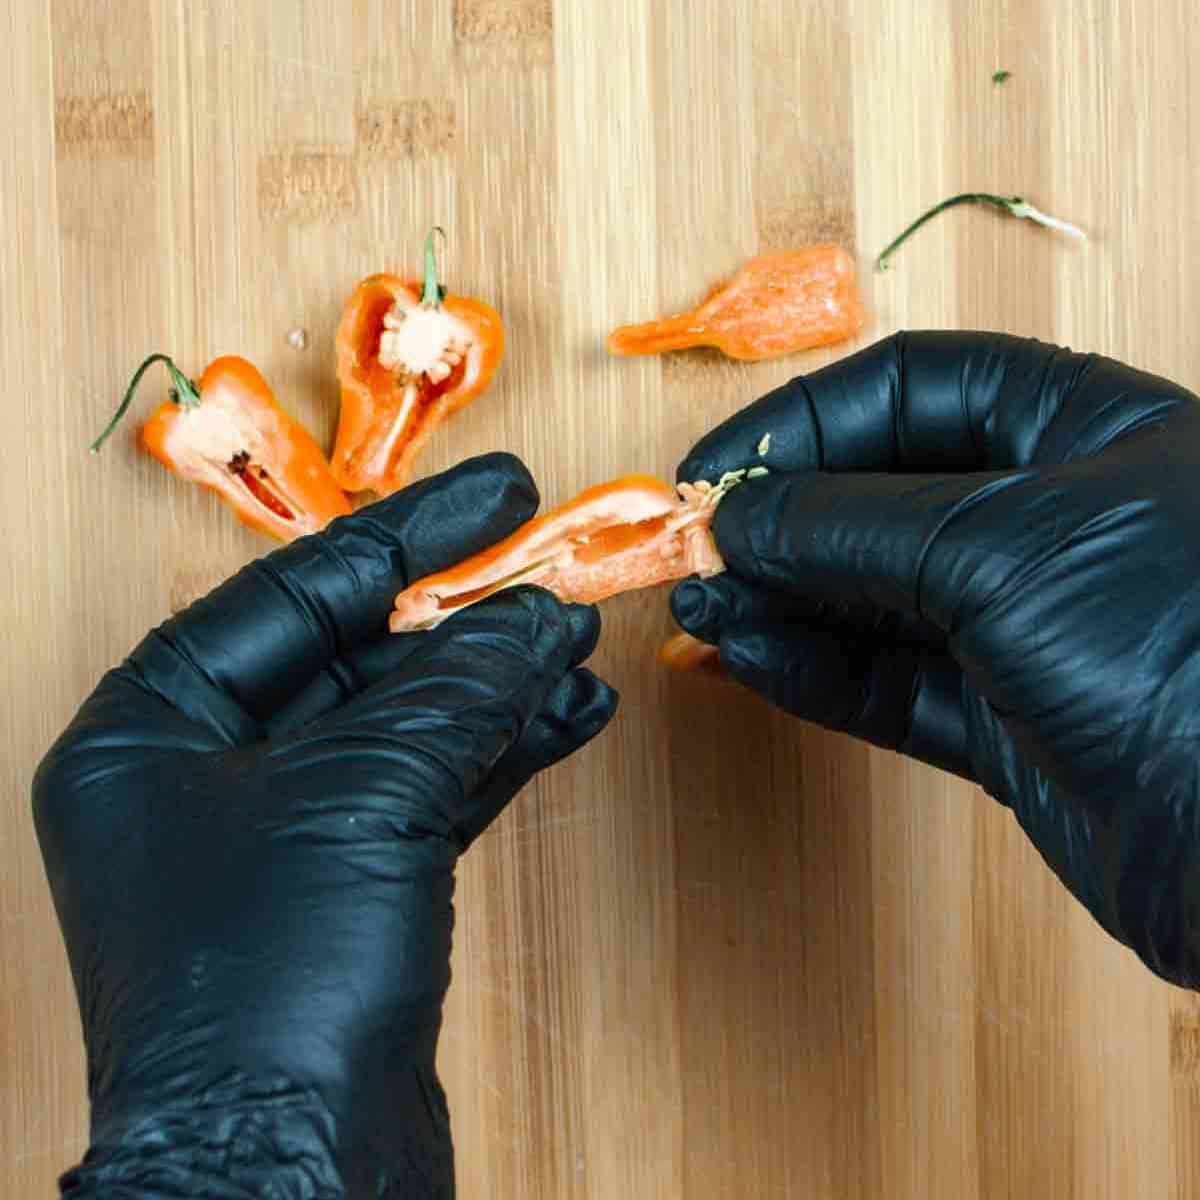 Removing seeds and pith from habanero peppers wearing black nitrile gloves.